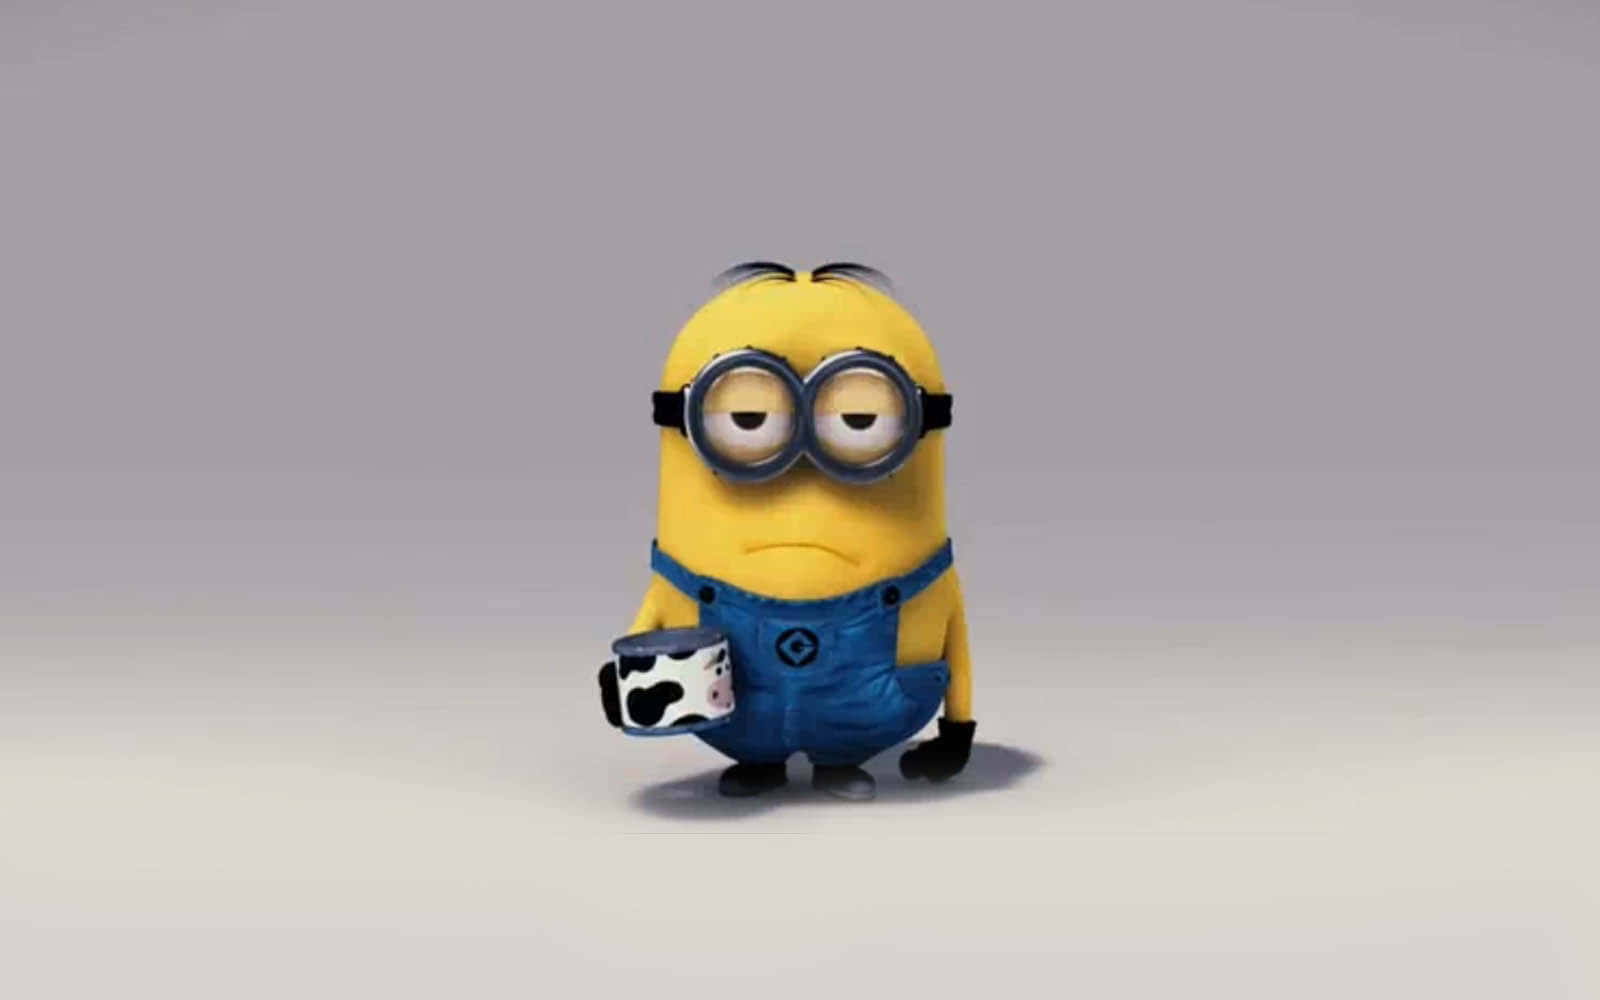 Fun-loving Minions, Bob, Kevin, And Stuart, From The Popular Despicable Me Series. Wallpaper